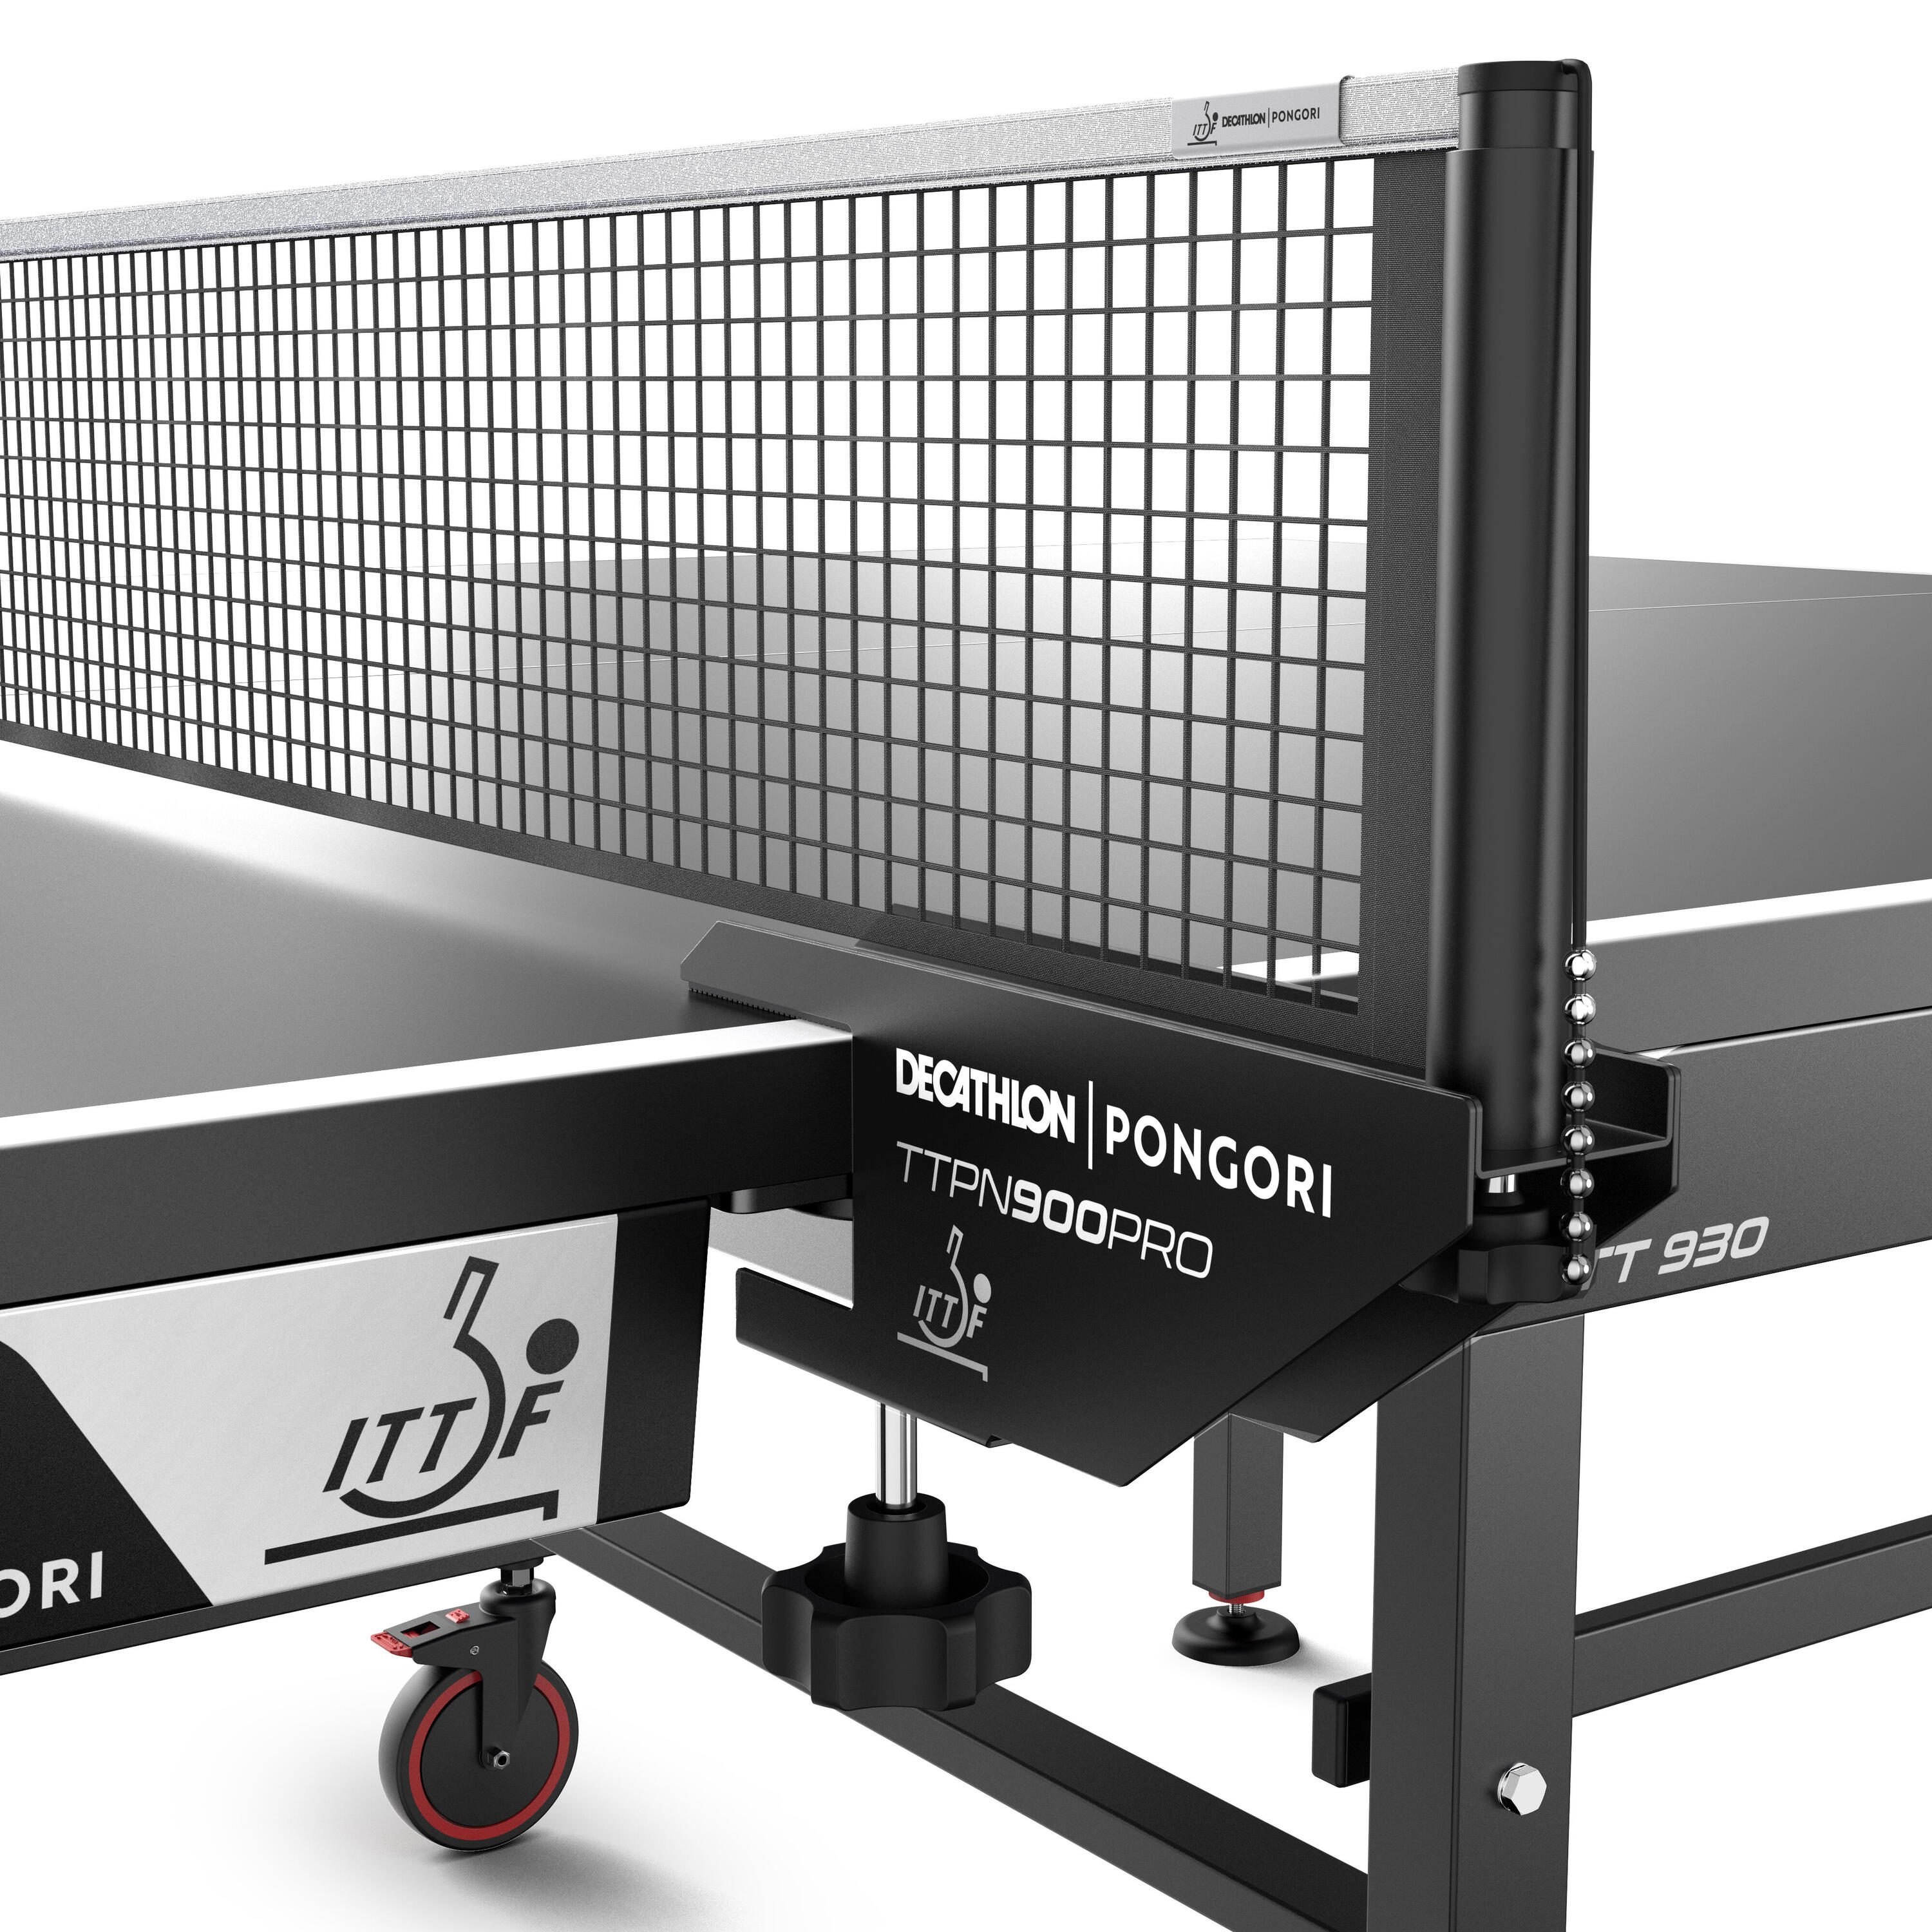 ITTF-Approved Club Table Tennis Table TTT 930 with Black Tabletops 6/15